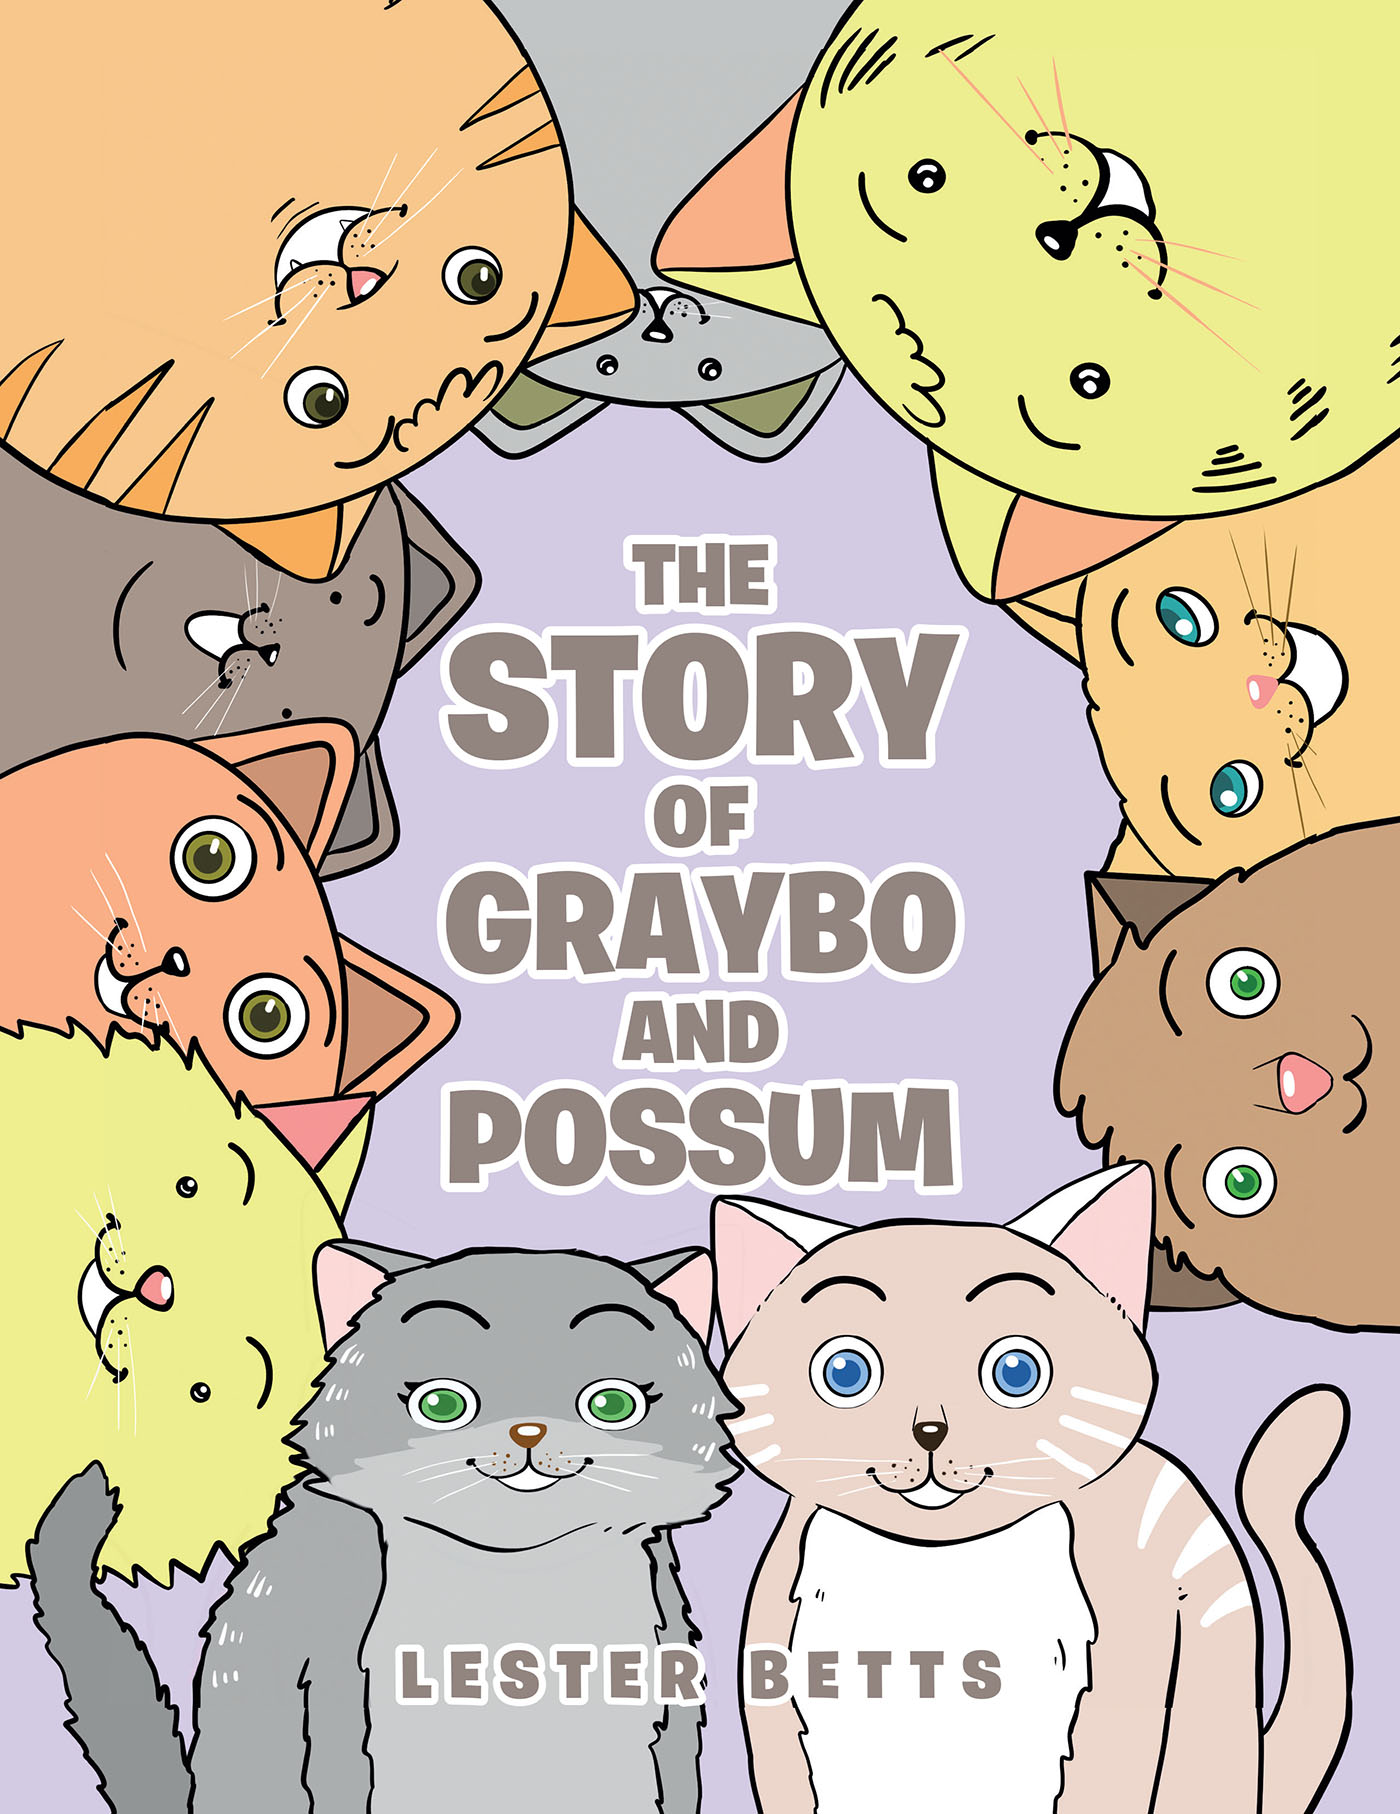 Lester Betts’s Newly Released “The Story of Graybo and Possum” is a Lighthearted Tale of Two Little Kittens and the Family That Loves Them